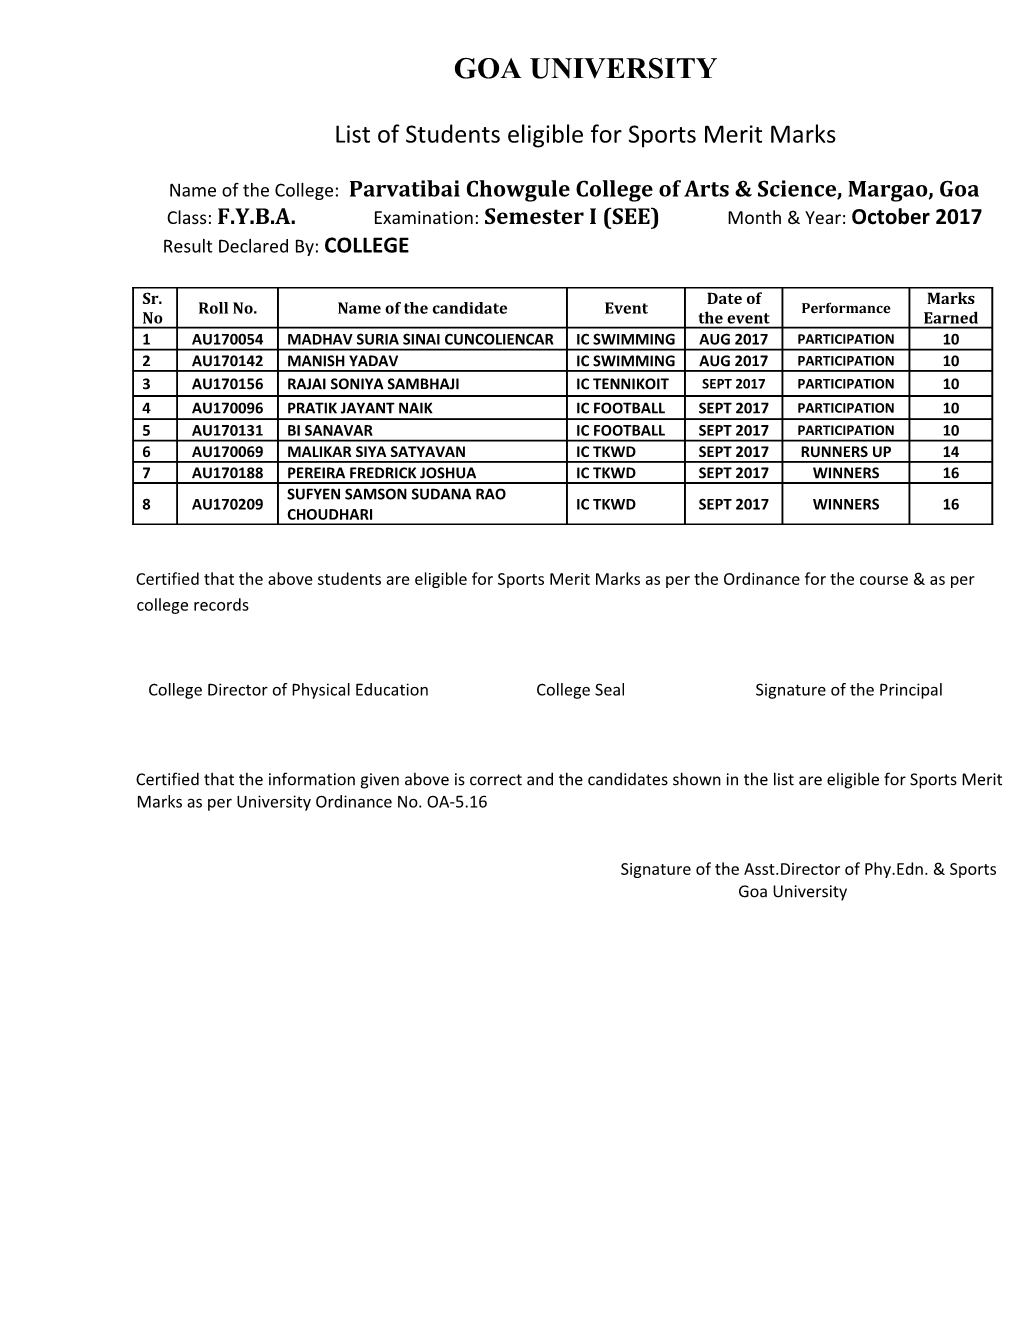 List of Students Eligible for Sports Merit Marks